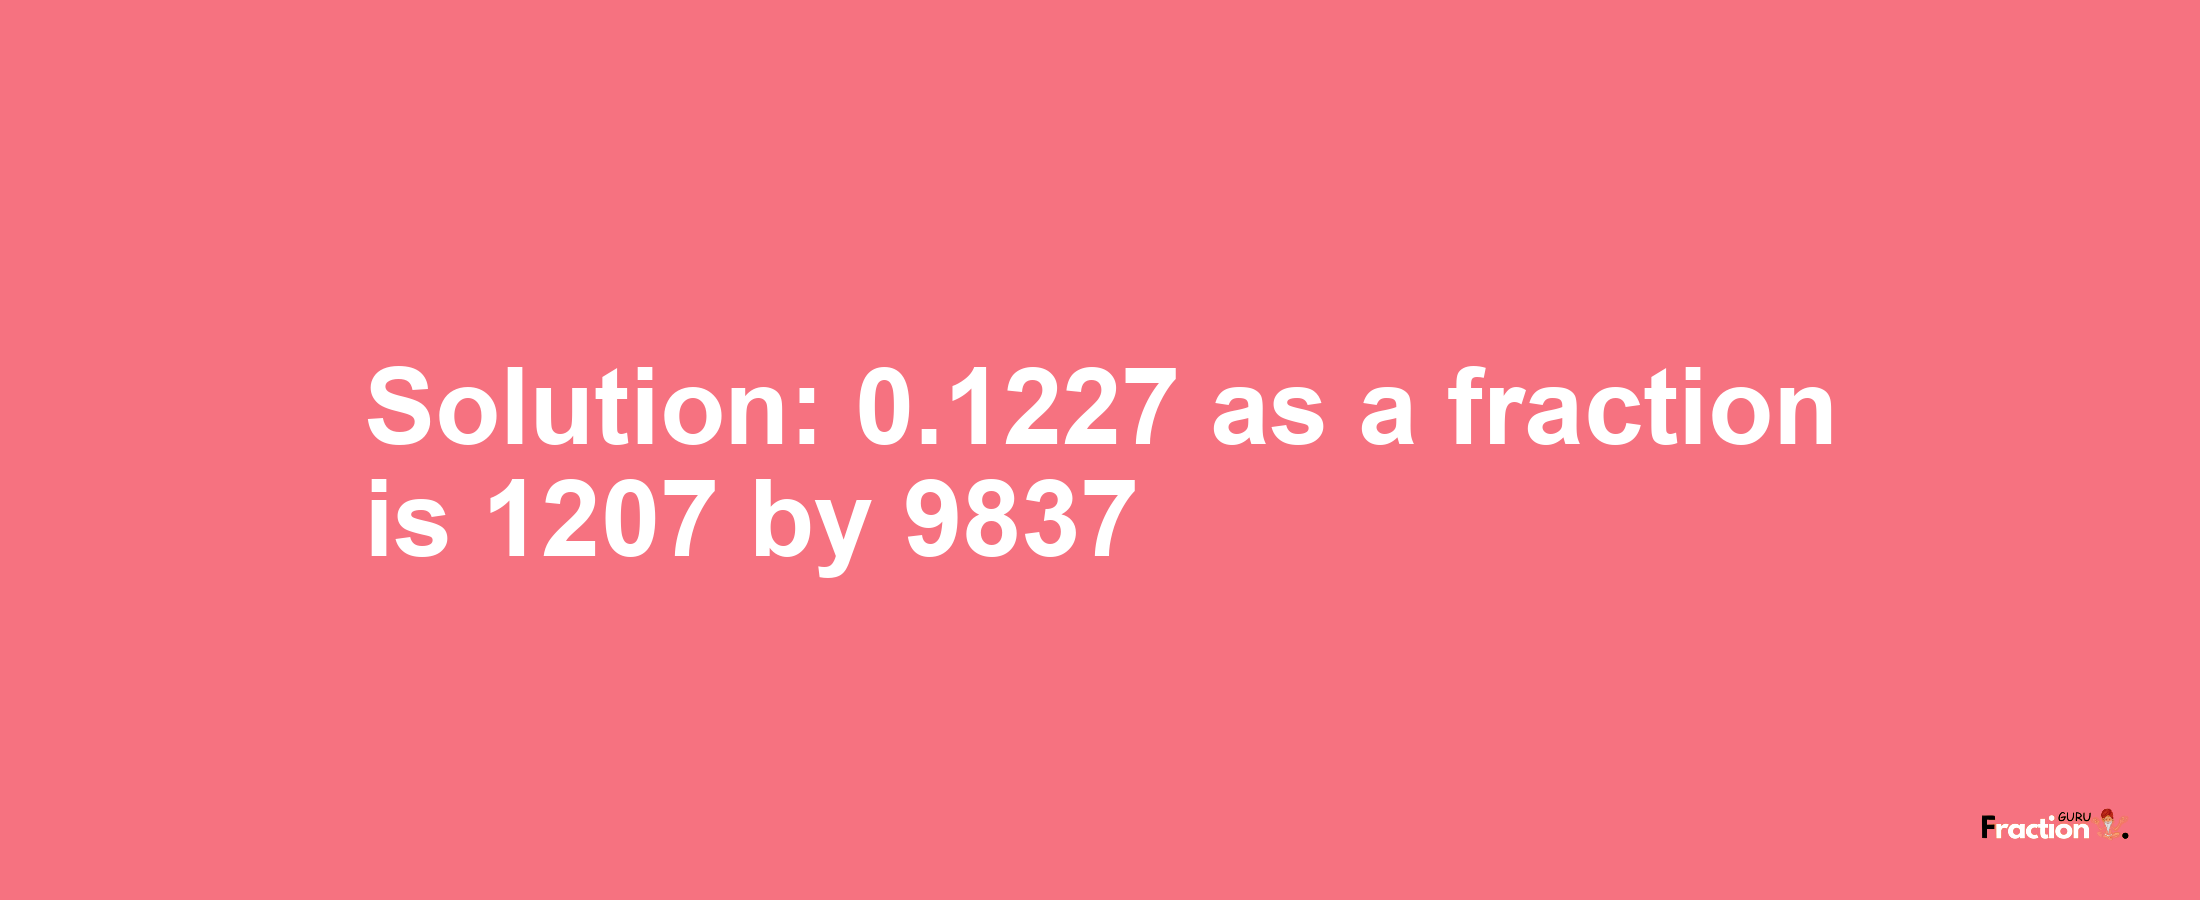 Solution:0.1227 as a fraction is 1207/9837